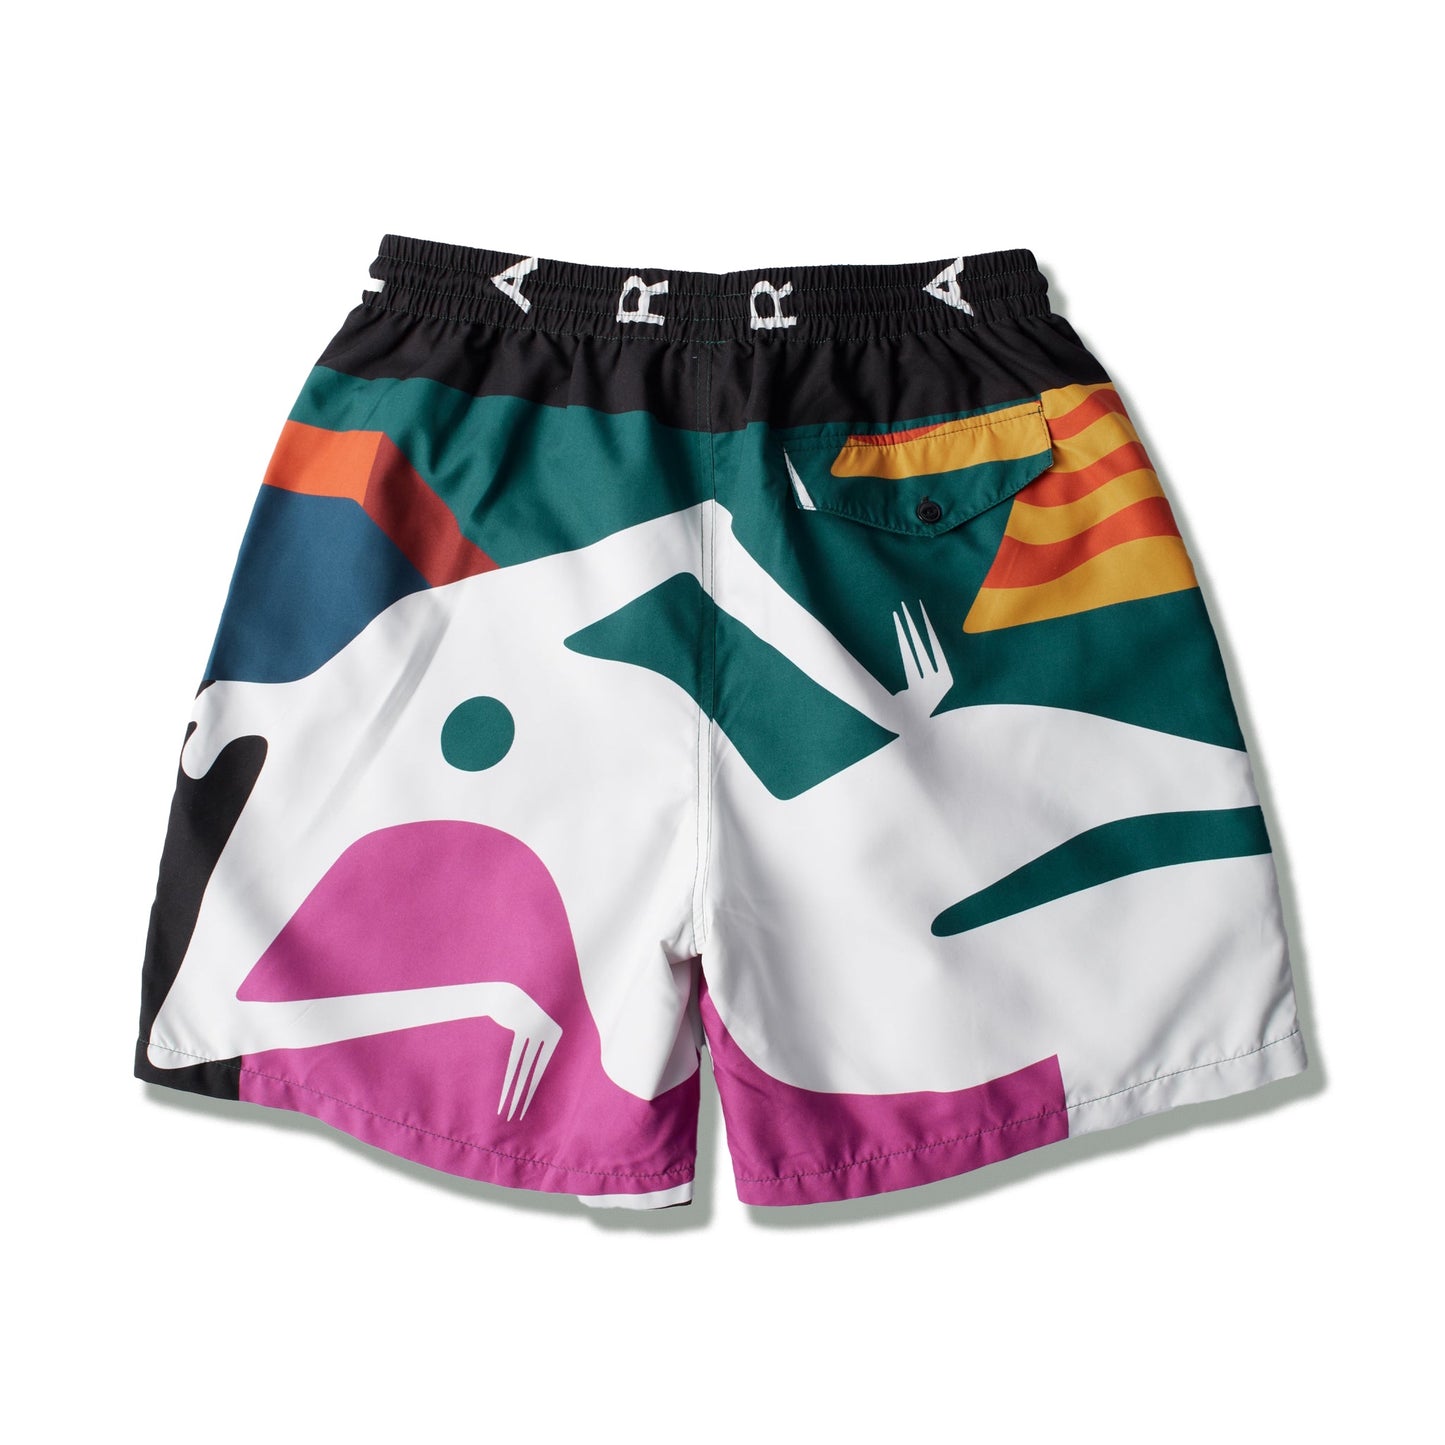 by Parra Beached in White Short